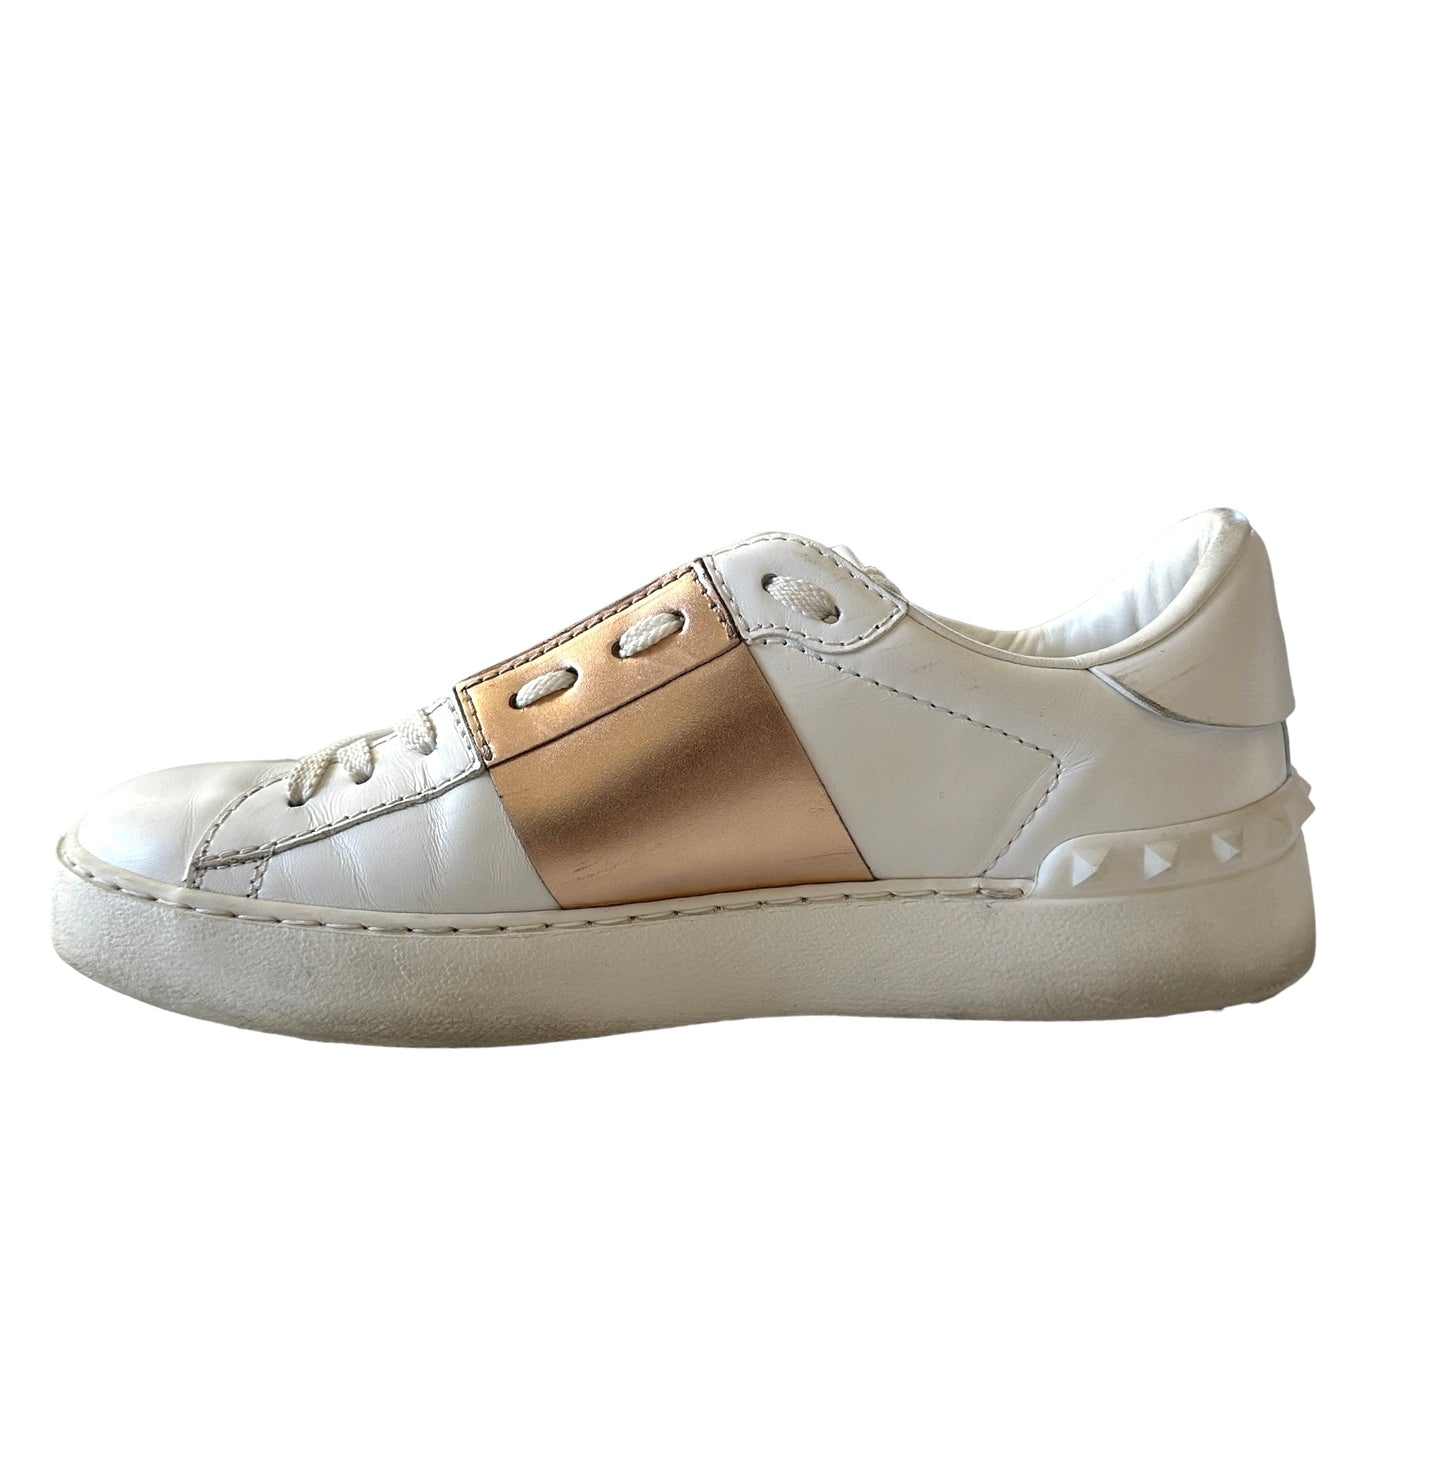 White / Rose Gold Sneakers - 7.5